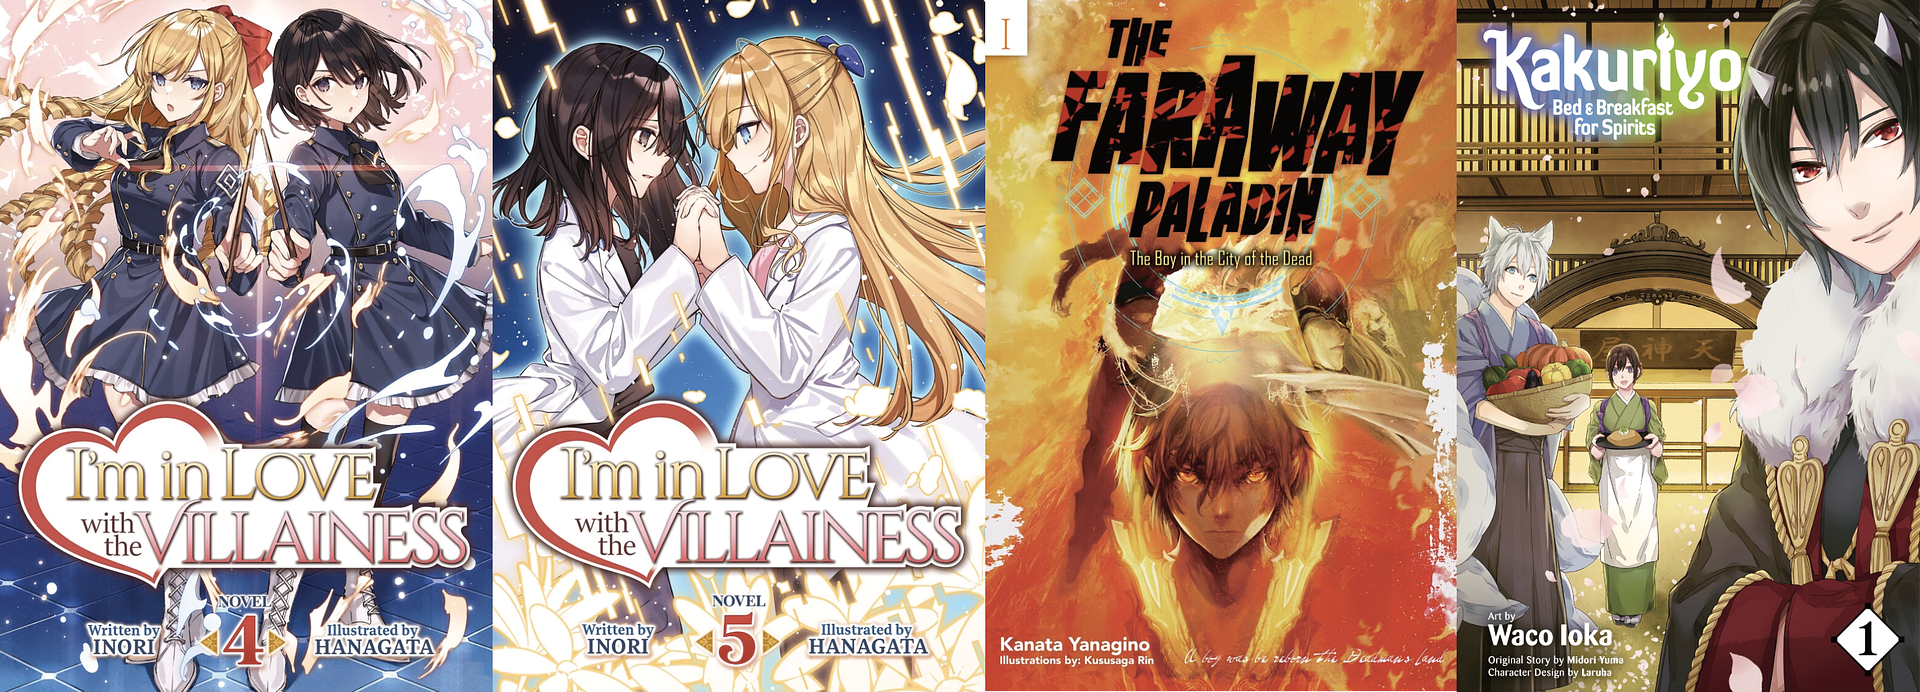 Covers of light novels I read in March 2023. Titles: I'm in Love with the Villainess Vol. 4 and 5, The Faraway Paladin Vol. 1, and Kakuriyo: Bed and Breakfast for Spirits Vol. 1